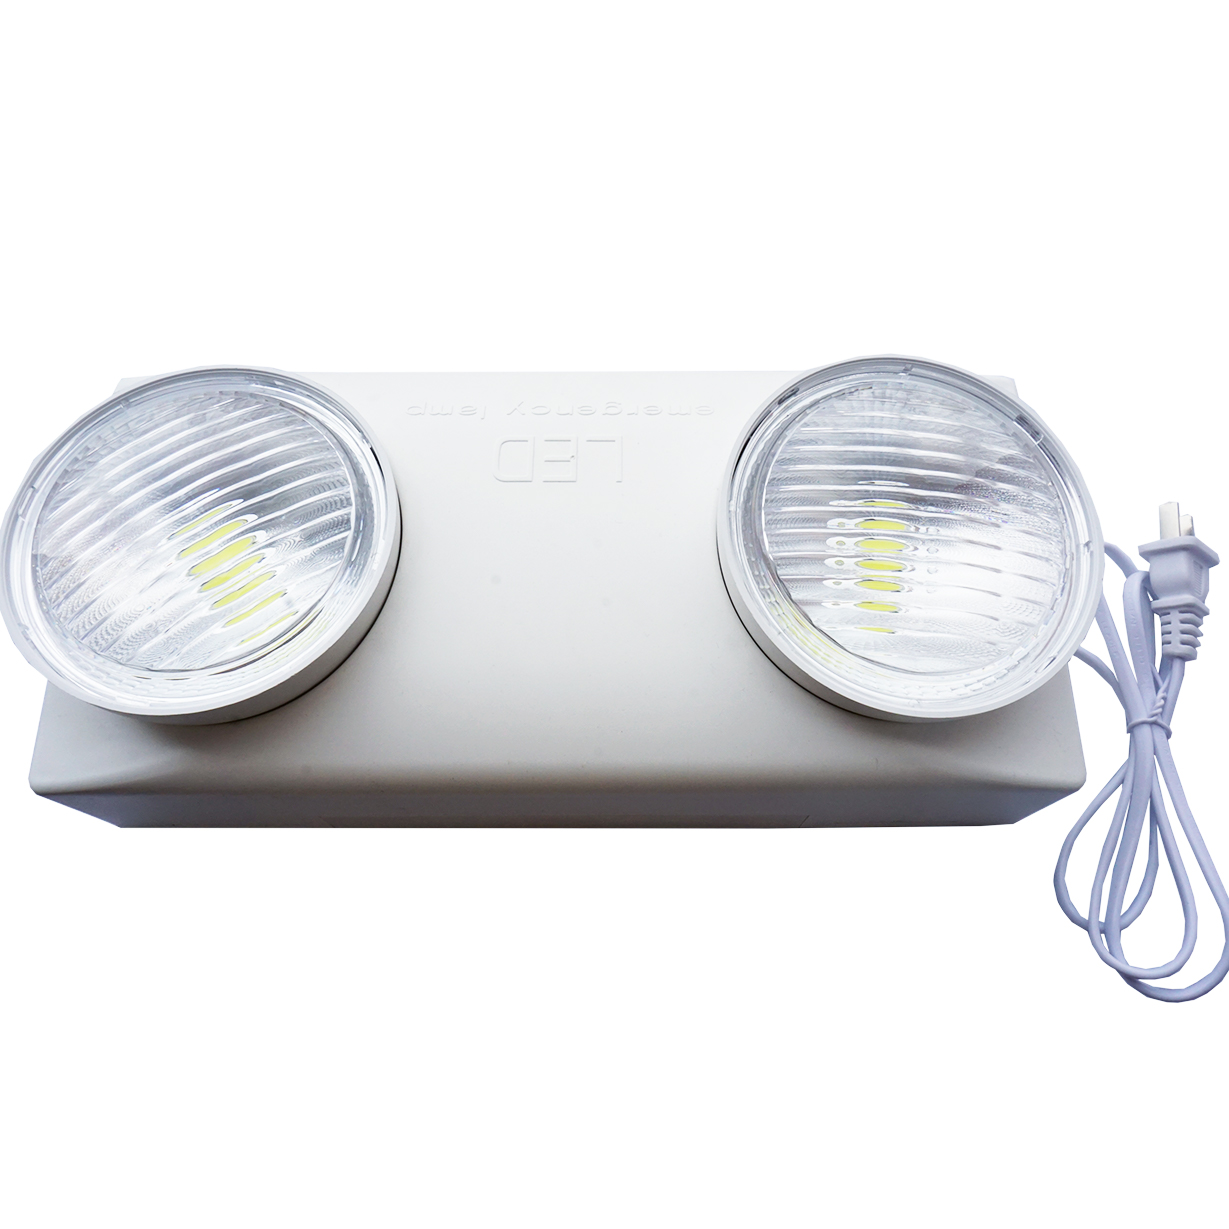 2019 HOT SALE 6W TWO ADJUSTABLE FIRE EMERGENCY LIGHT OF LED